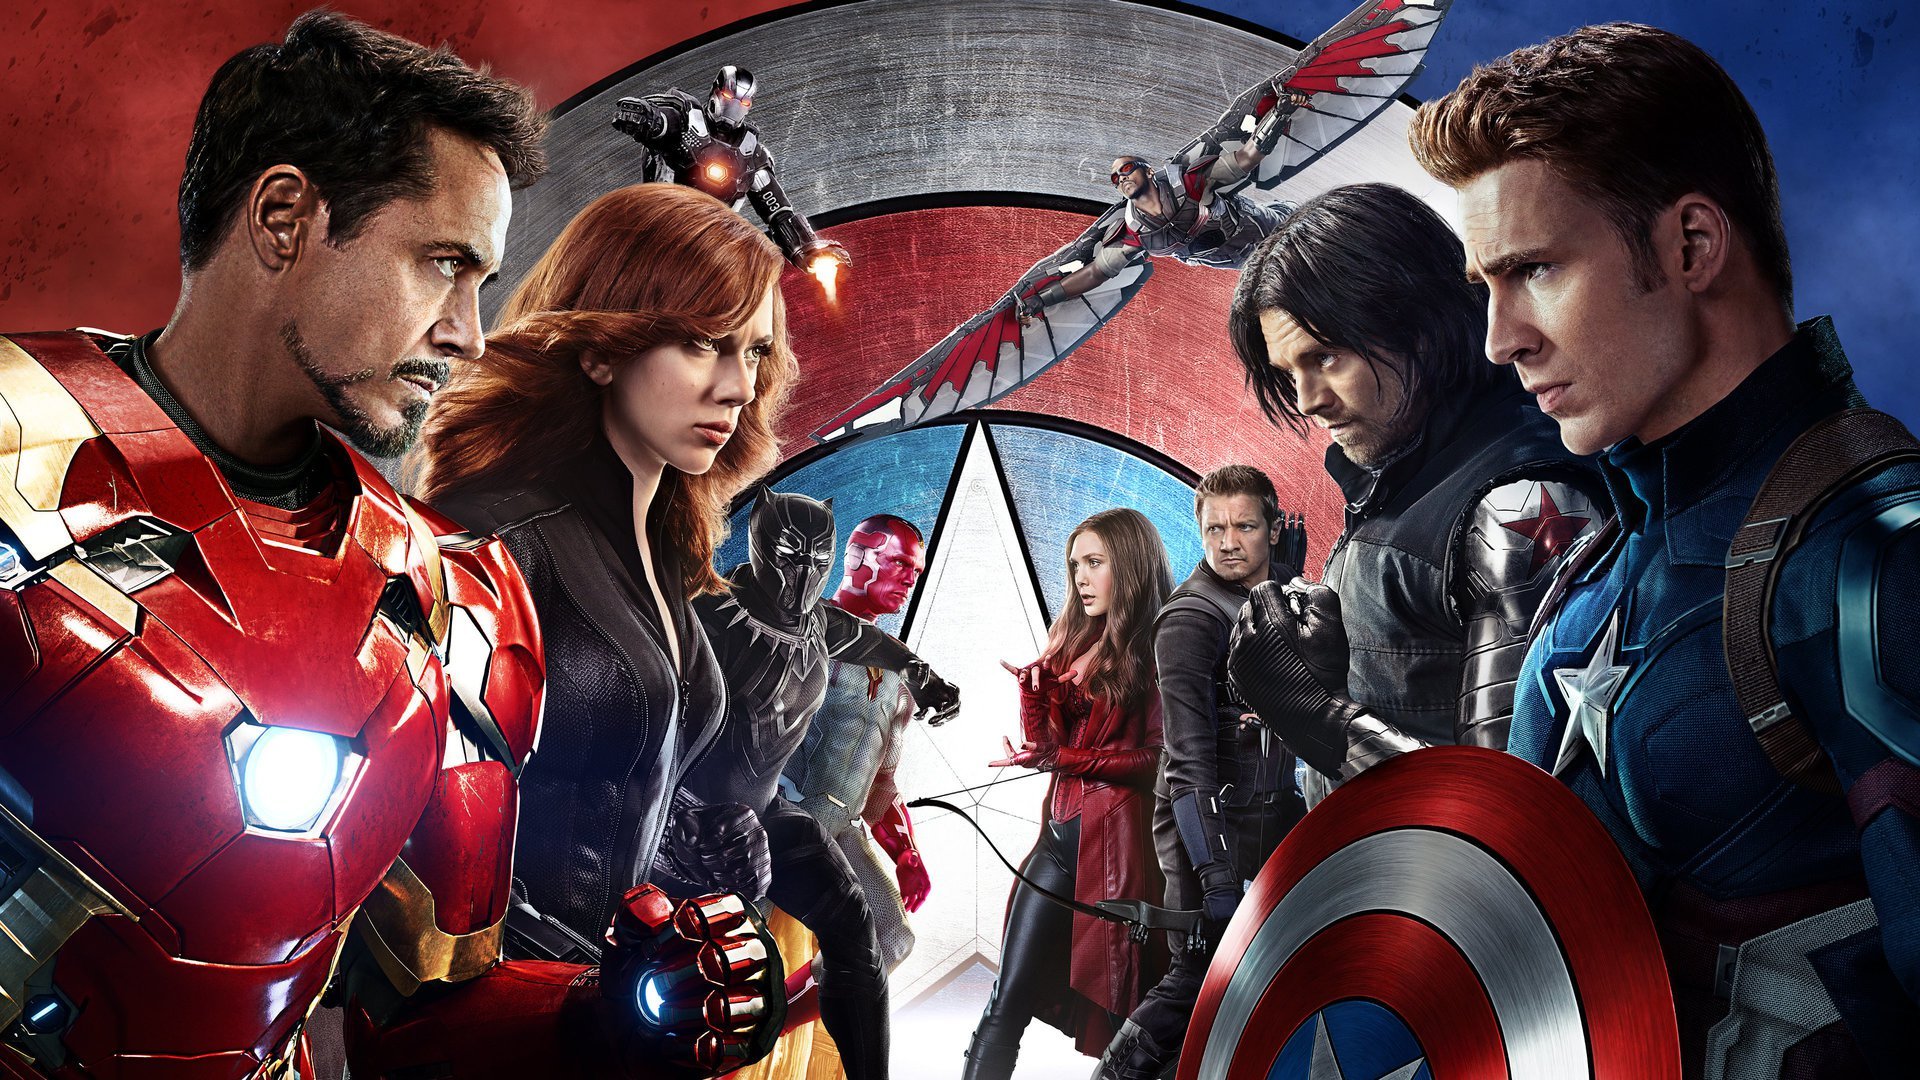 In what year does the first scene in Captain America: Civil War take place?